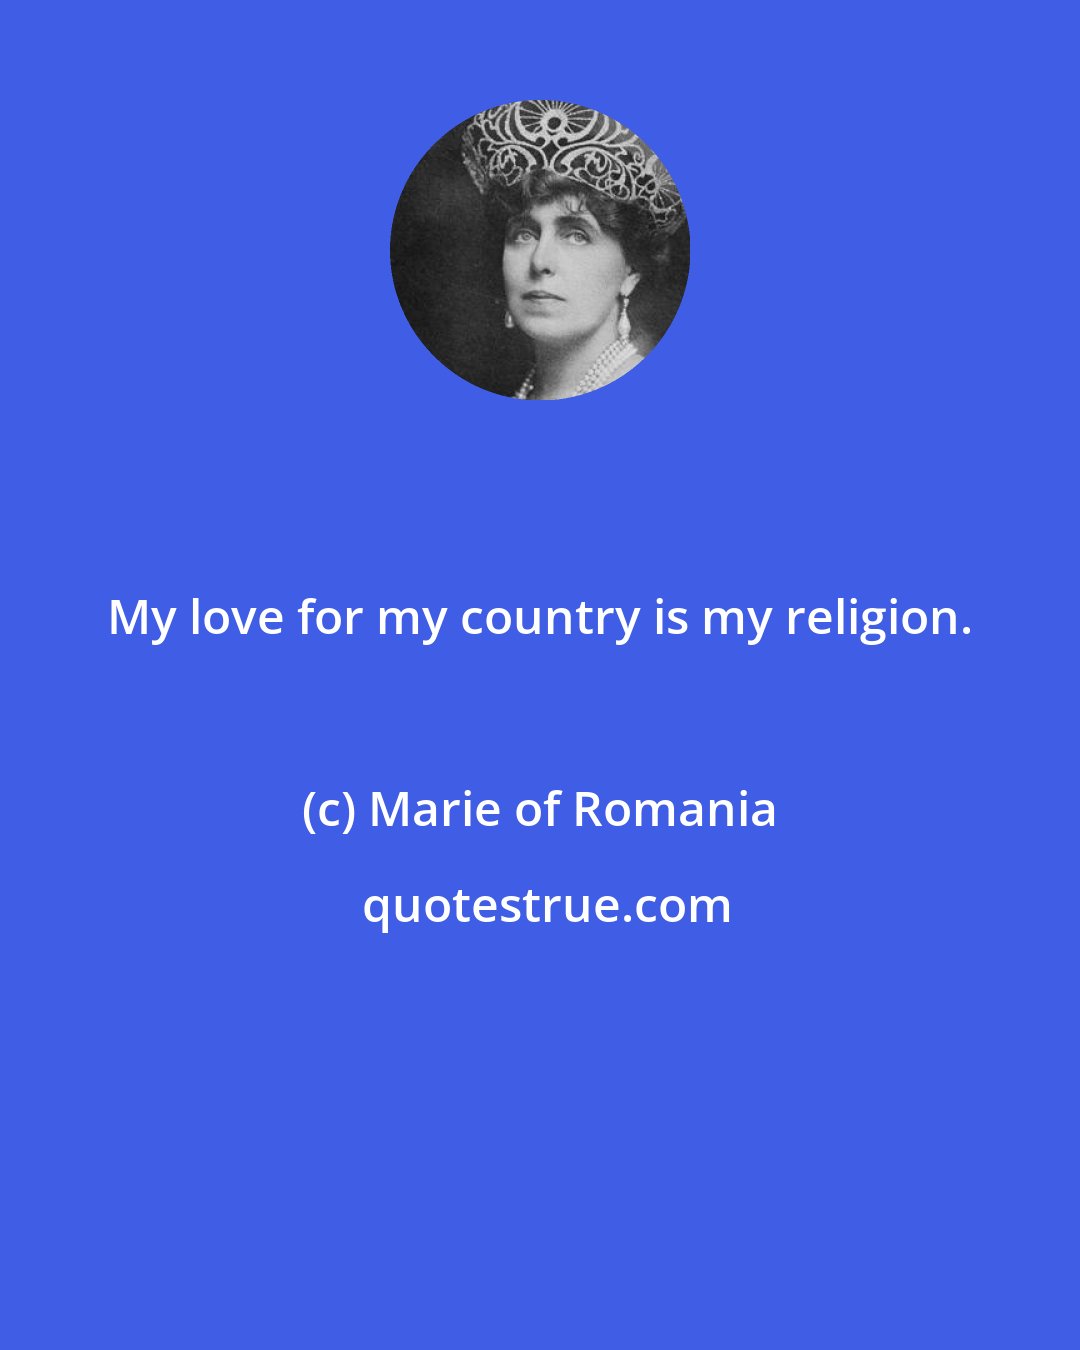 Marie of Romania: My love for my country is my religion.